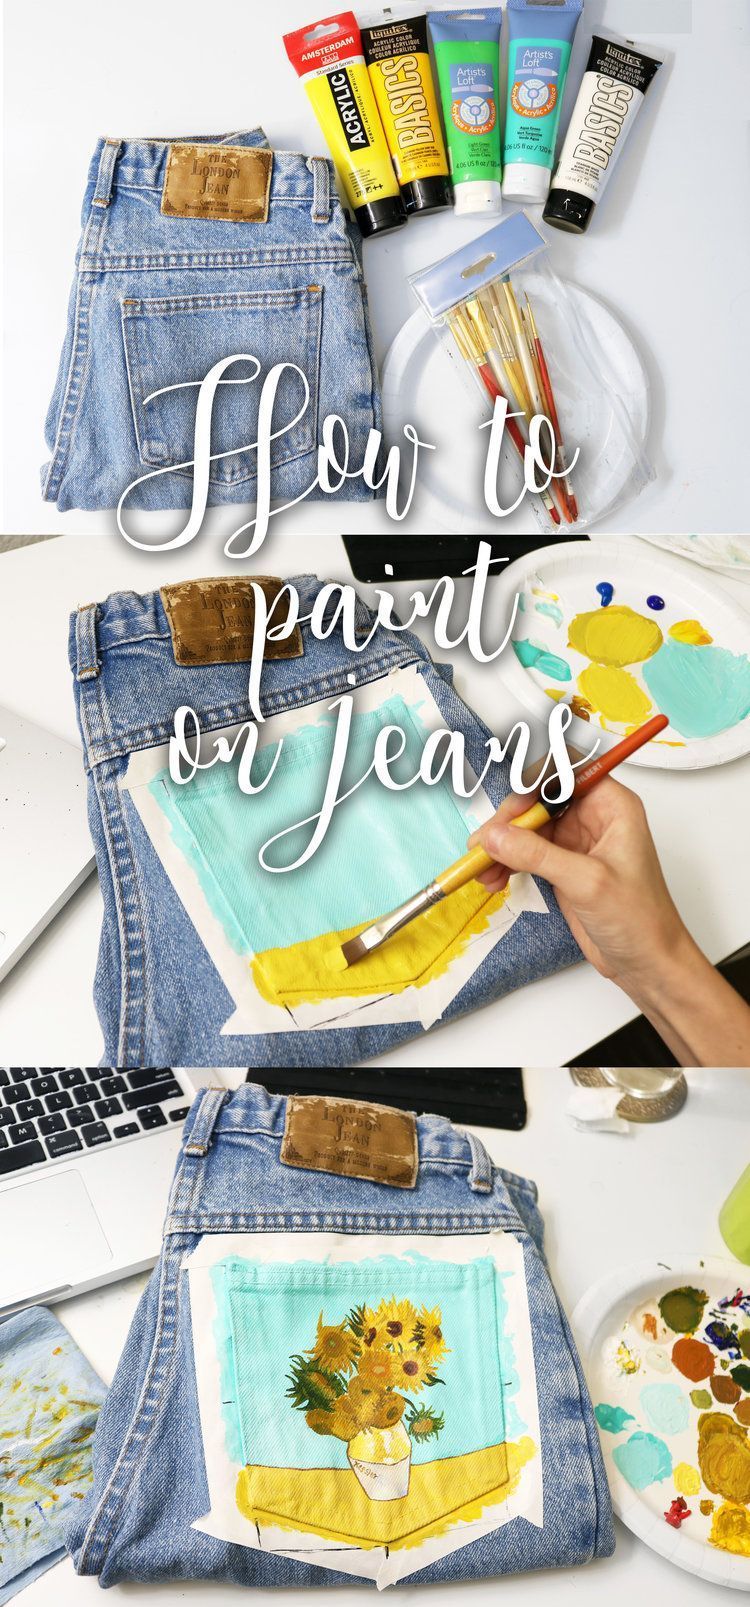 13 DIY Clothes Paint projects ideas